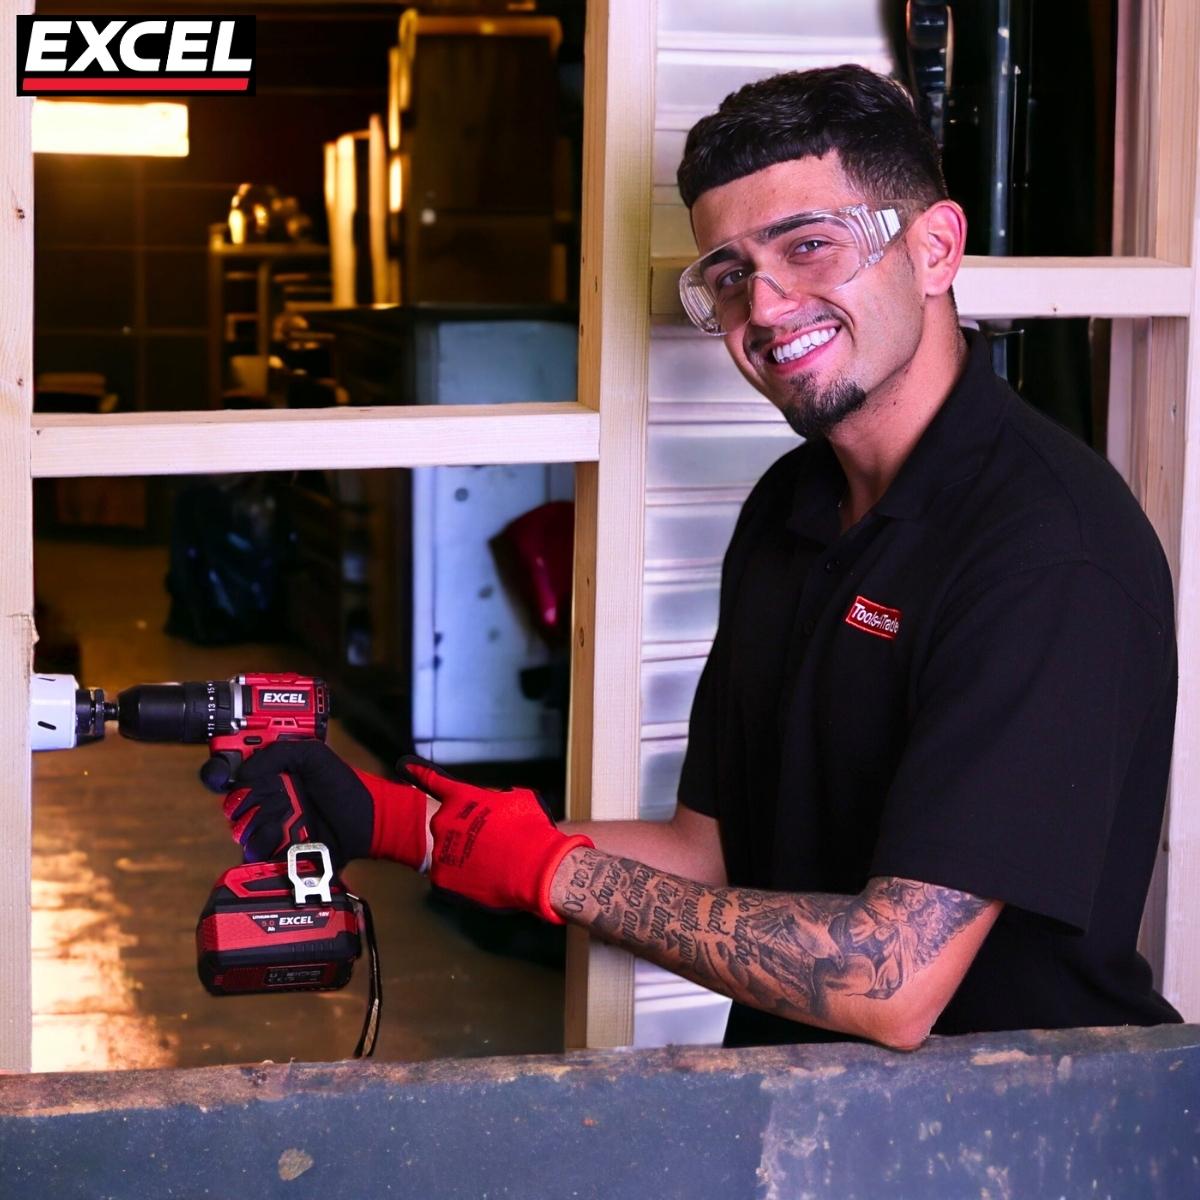 Excel 18V Brushless Twin Pack Impact Driver & Combi Drill with 2 x 5.0Ah Battery Charger